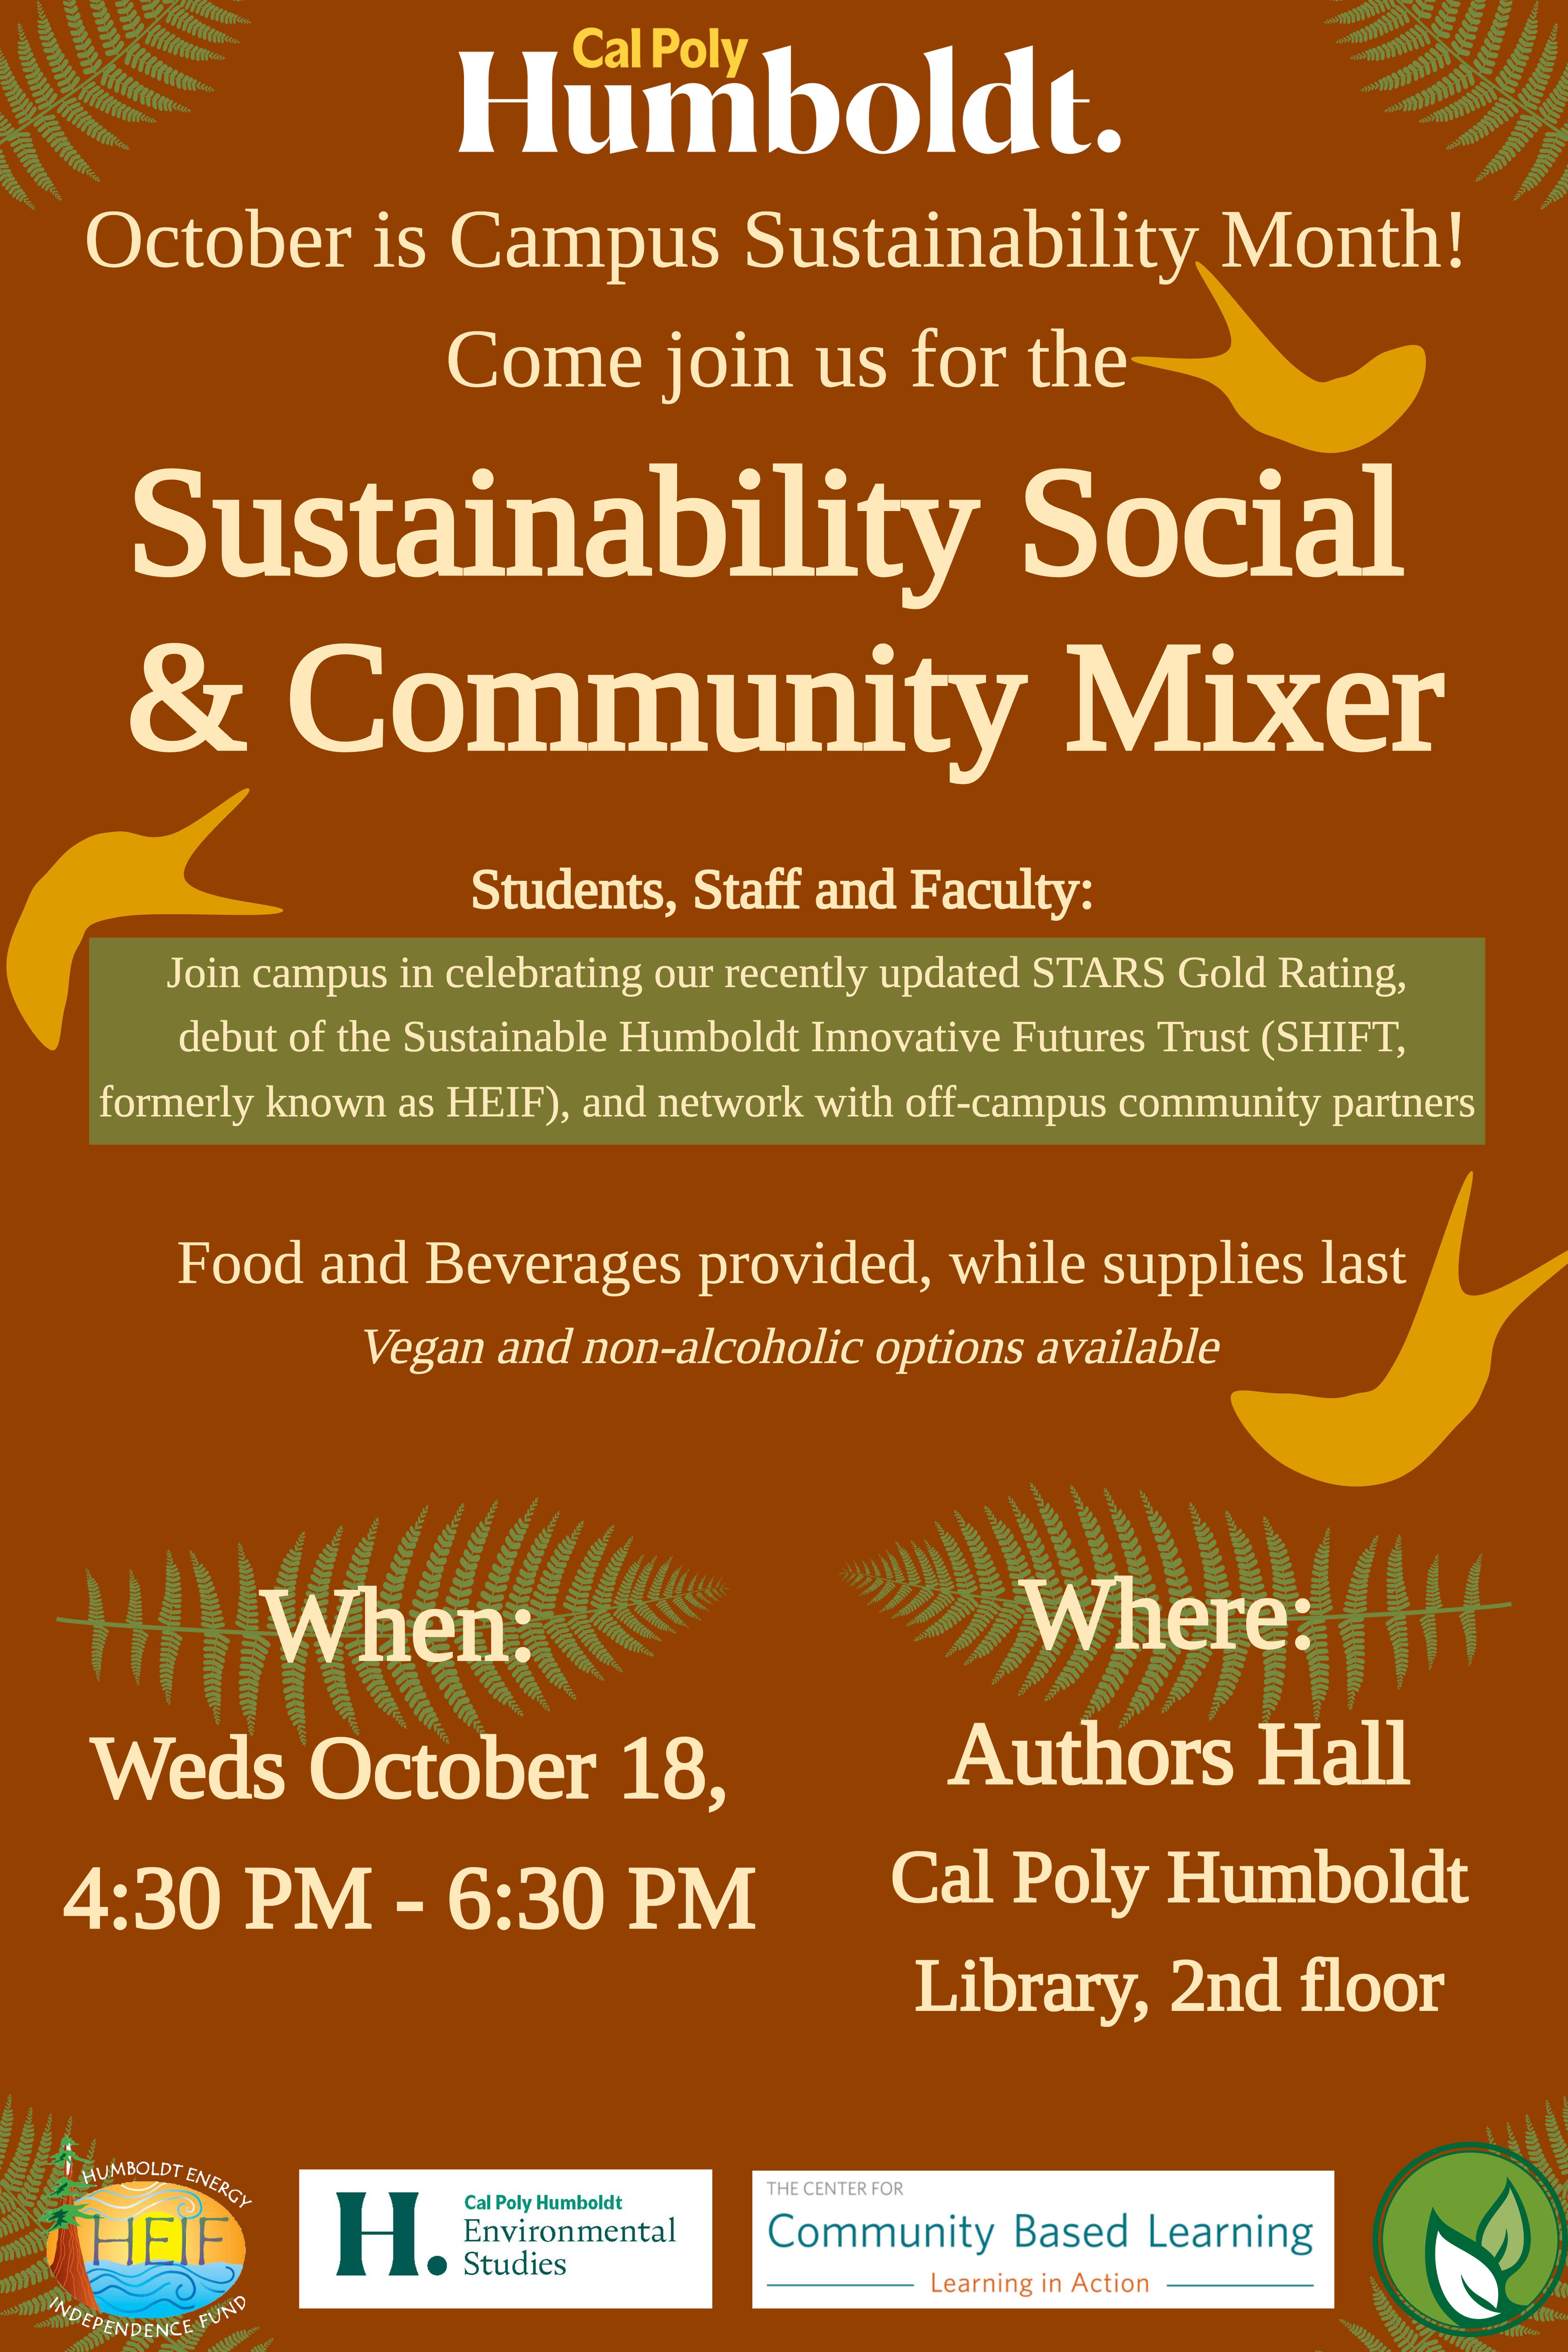 Images is a flyer for the Sustainability Social & Community Mixer Weds Oct 18th 4:30- 6:30pm 2nd Floor Library Author's Hall. Flyer has brown background with banana slug theme and green ferns. 